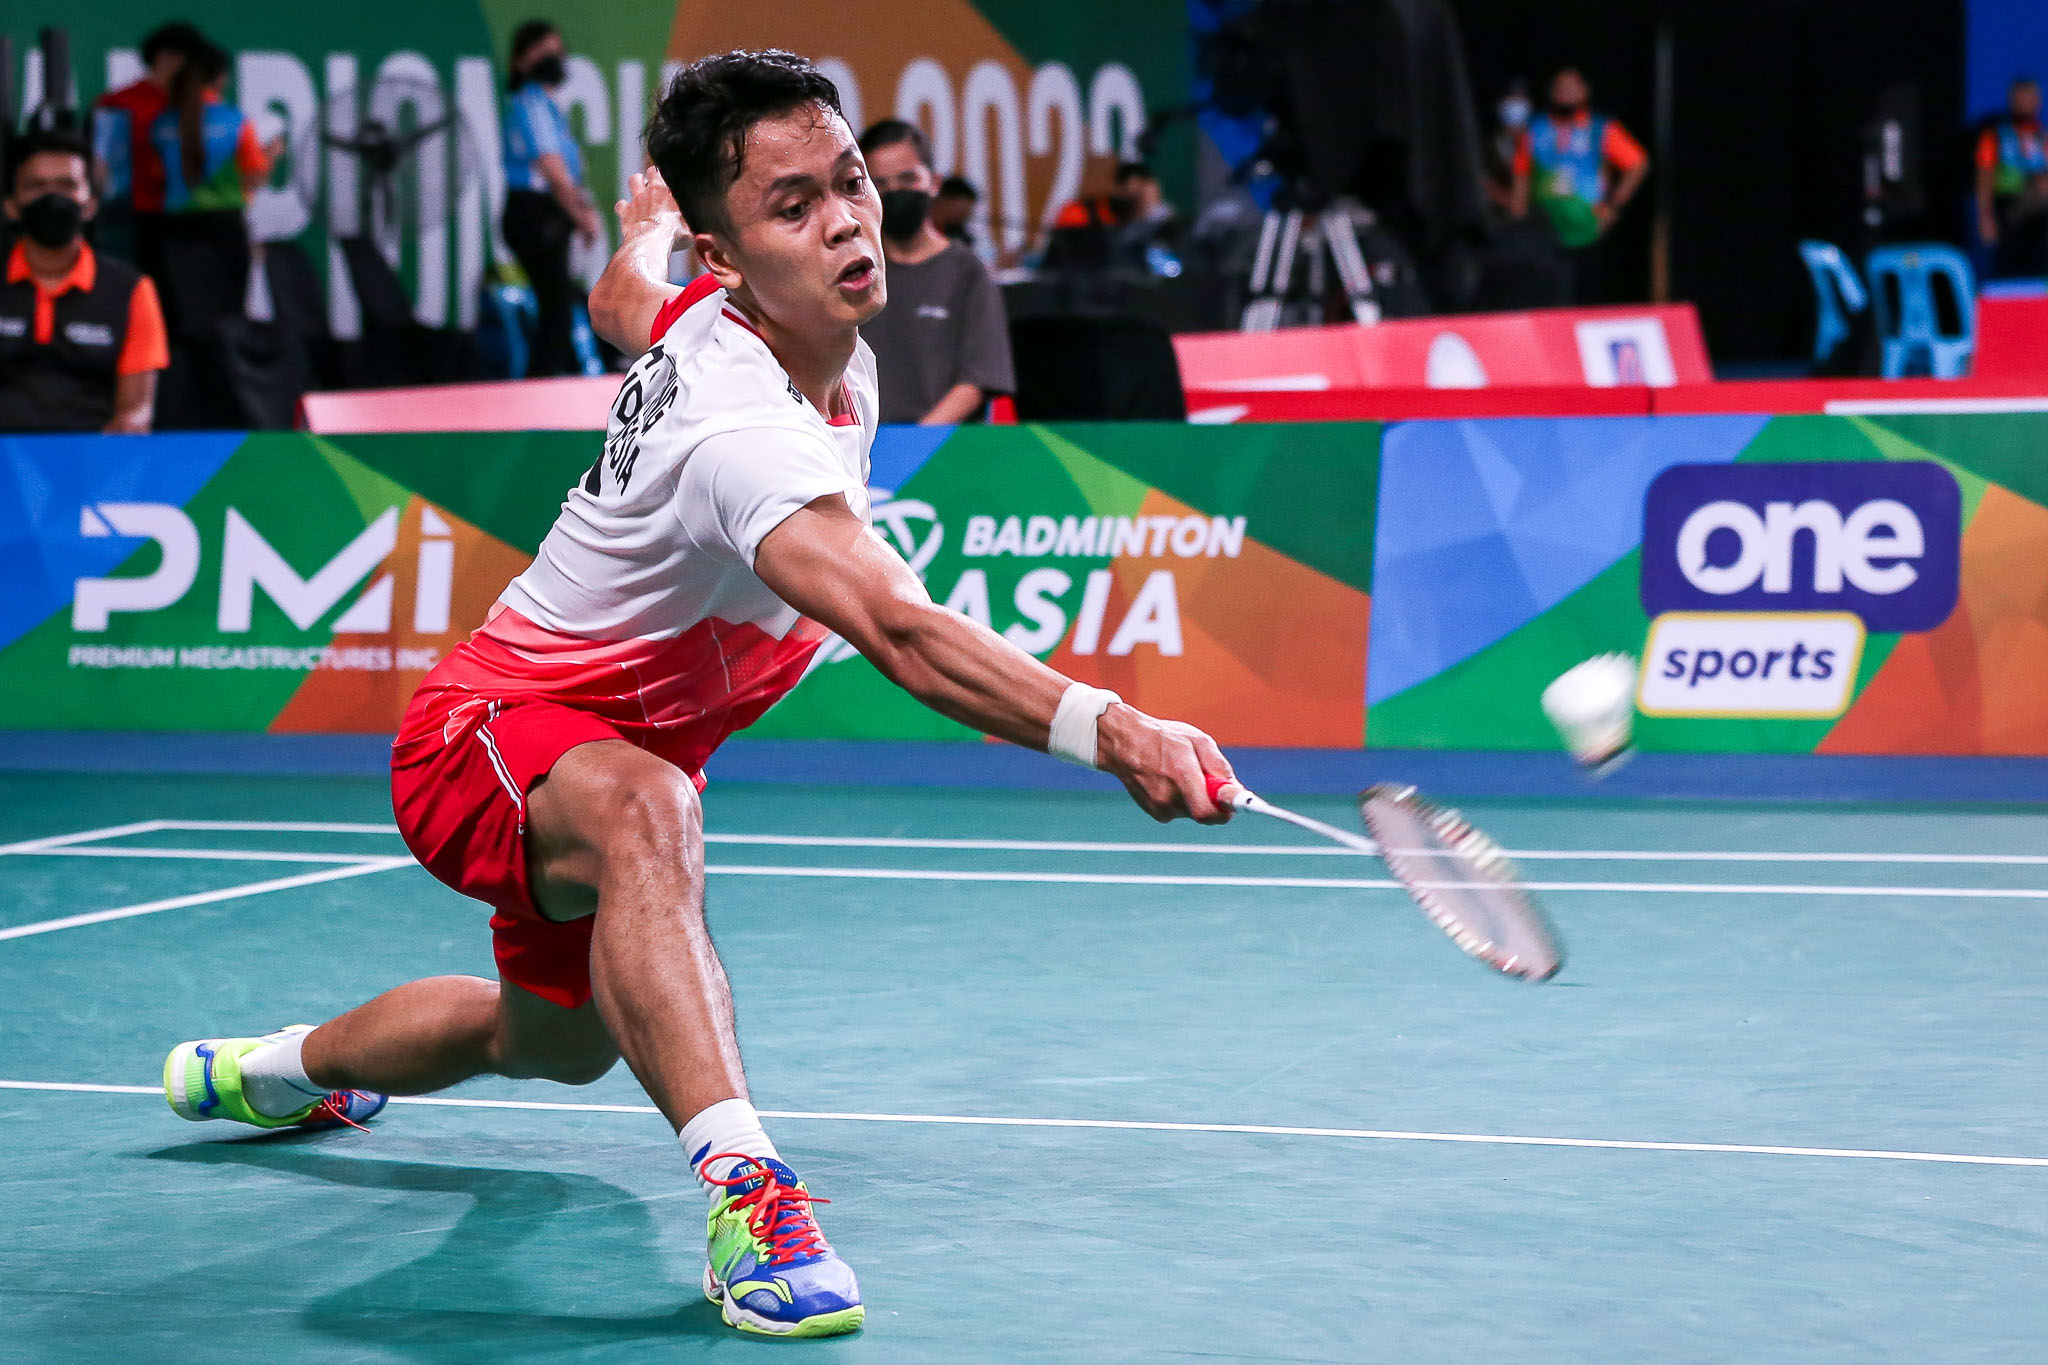 2022-BAC-Anthony-Sinisuka-GINTING-INA-2 Badminton Asia: Lee Zii Jia continues fine form from SEAG 2022 Badminton Asia Championships Badminton News  - philippine sports news